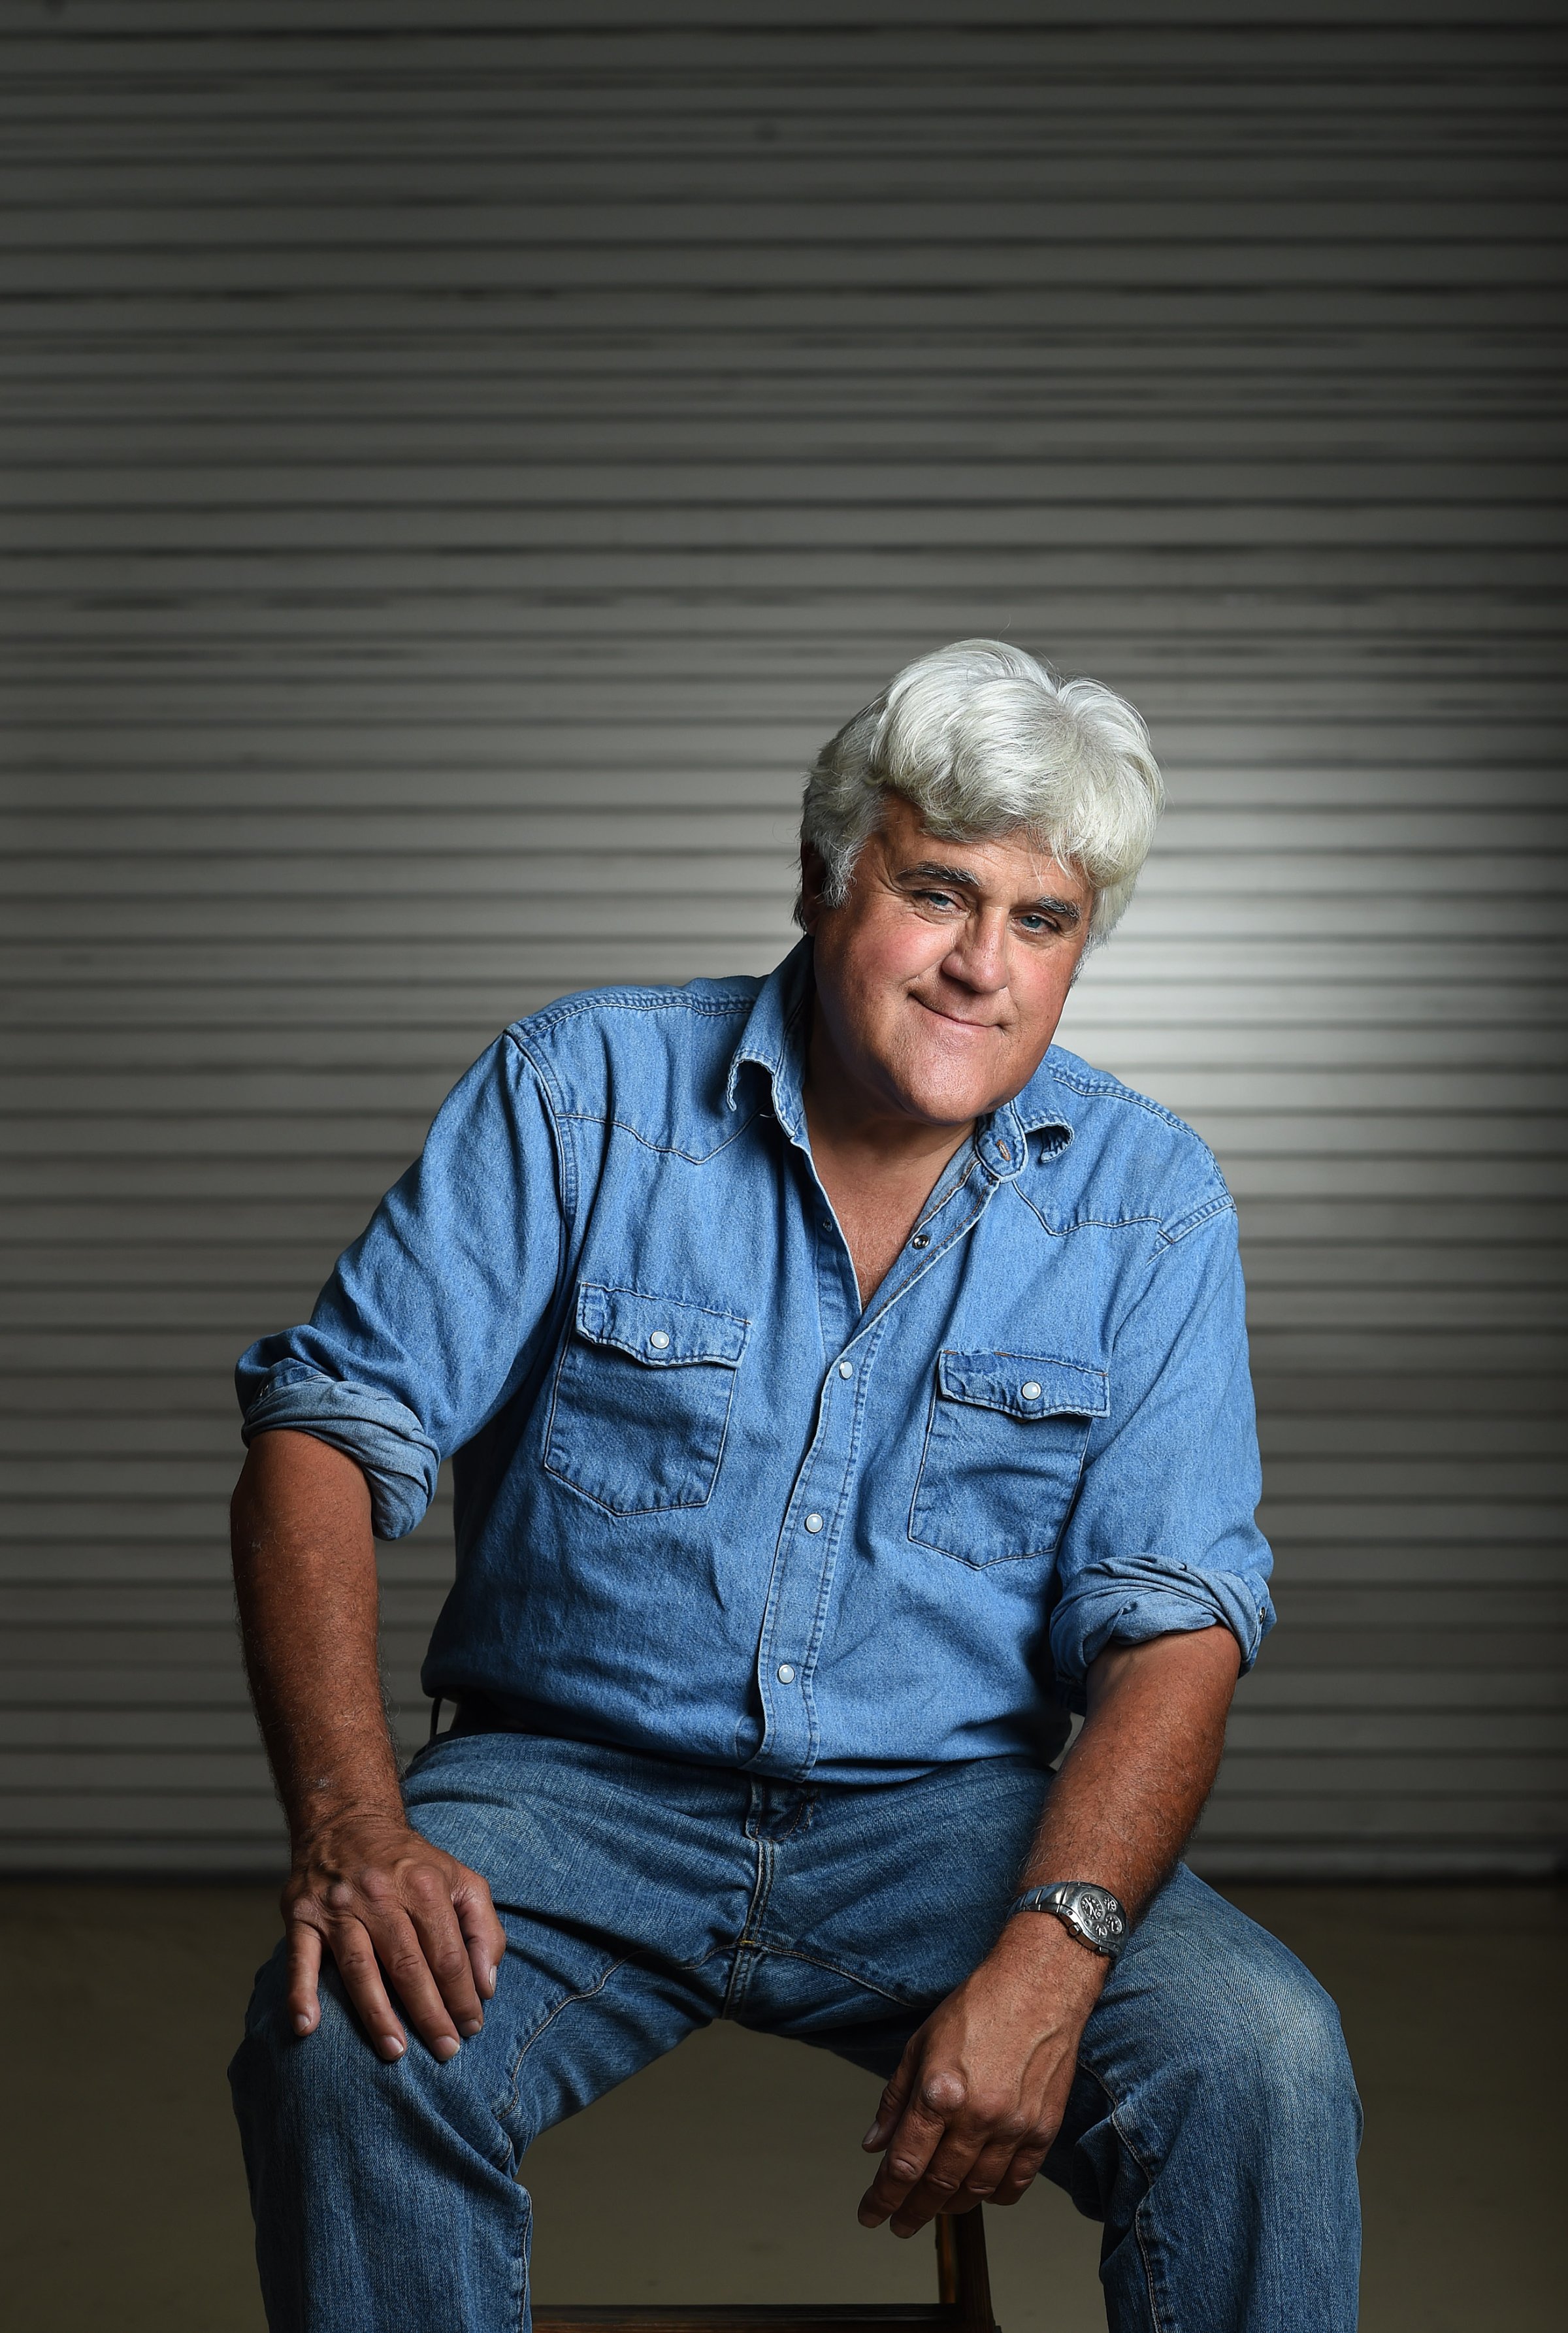 Jay Leno poses for a portrait at his car garage on Sept. 24, 2014 in Burbank, Calif.